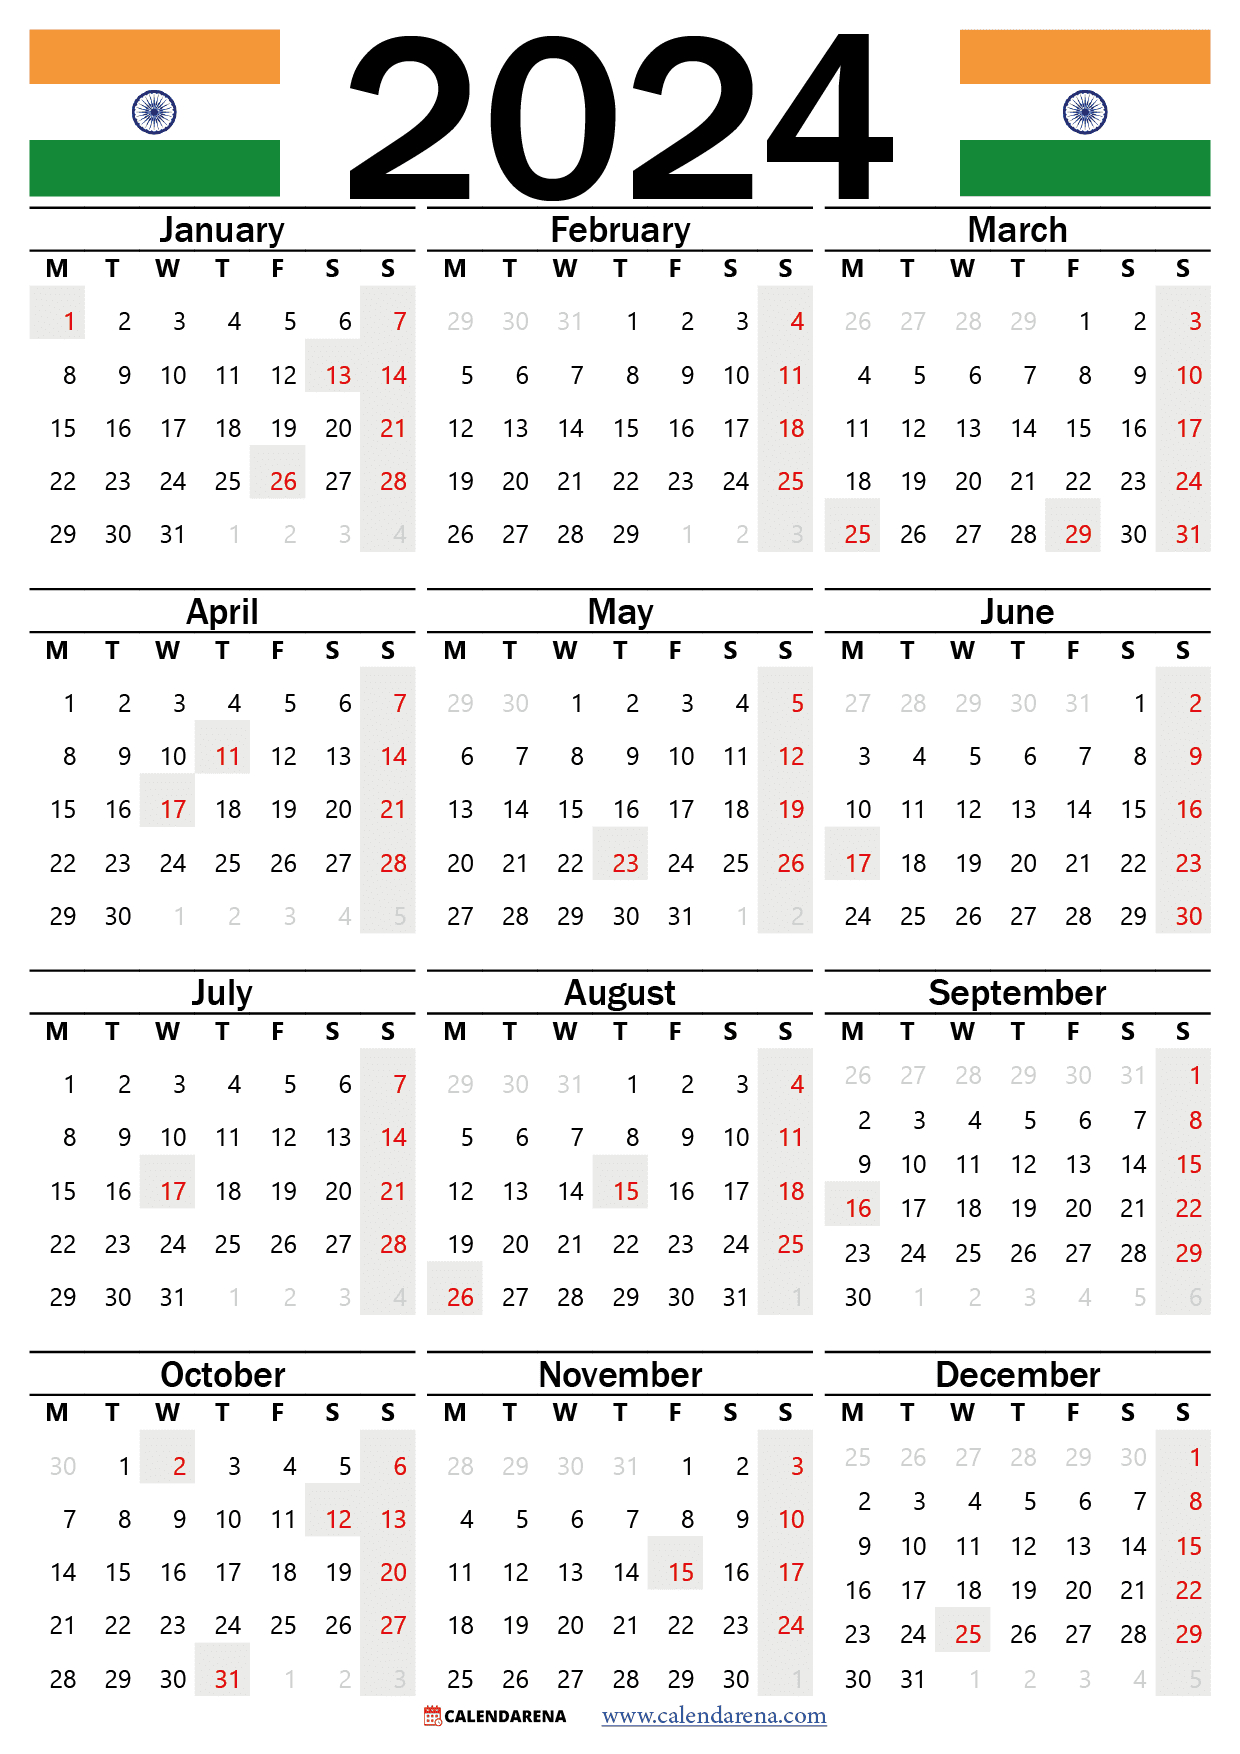 Calendar 2024 India With Holidays And Festivals | Printable Calendar 2024 India With Holidays And Festivals